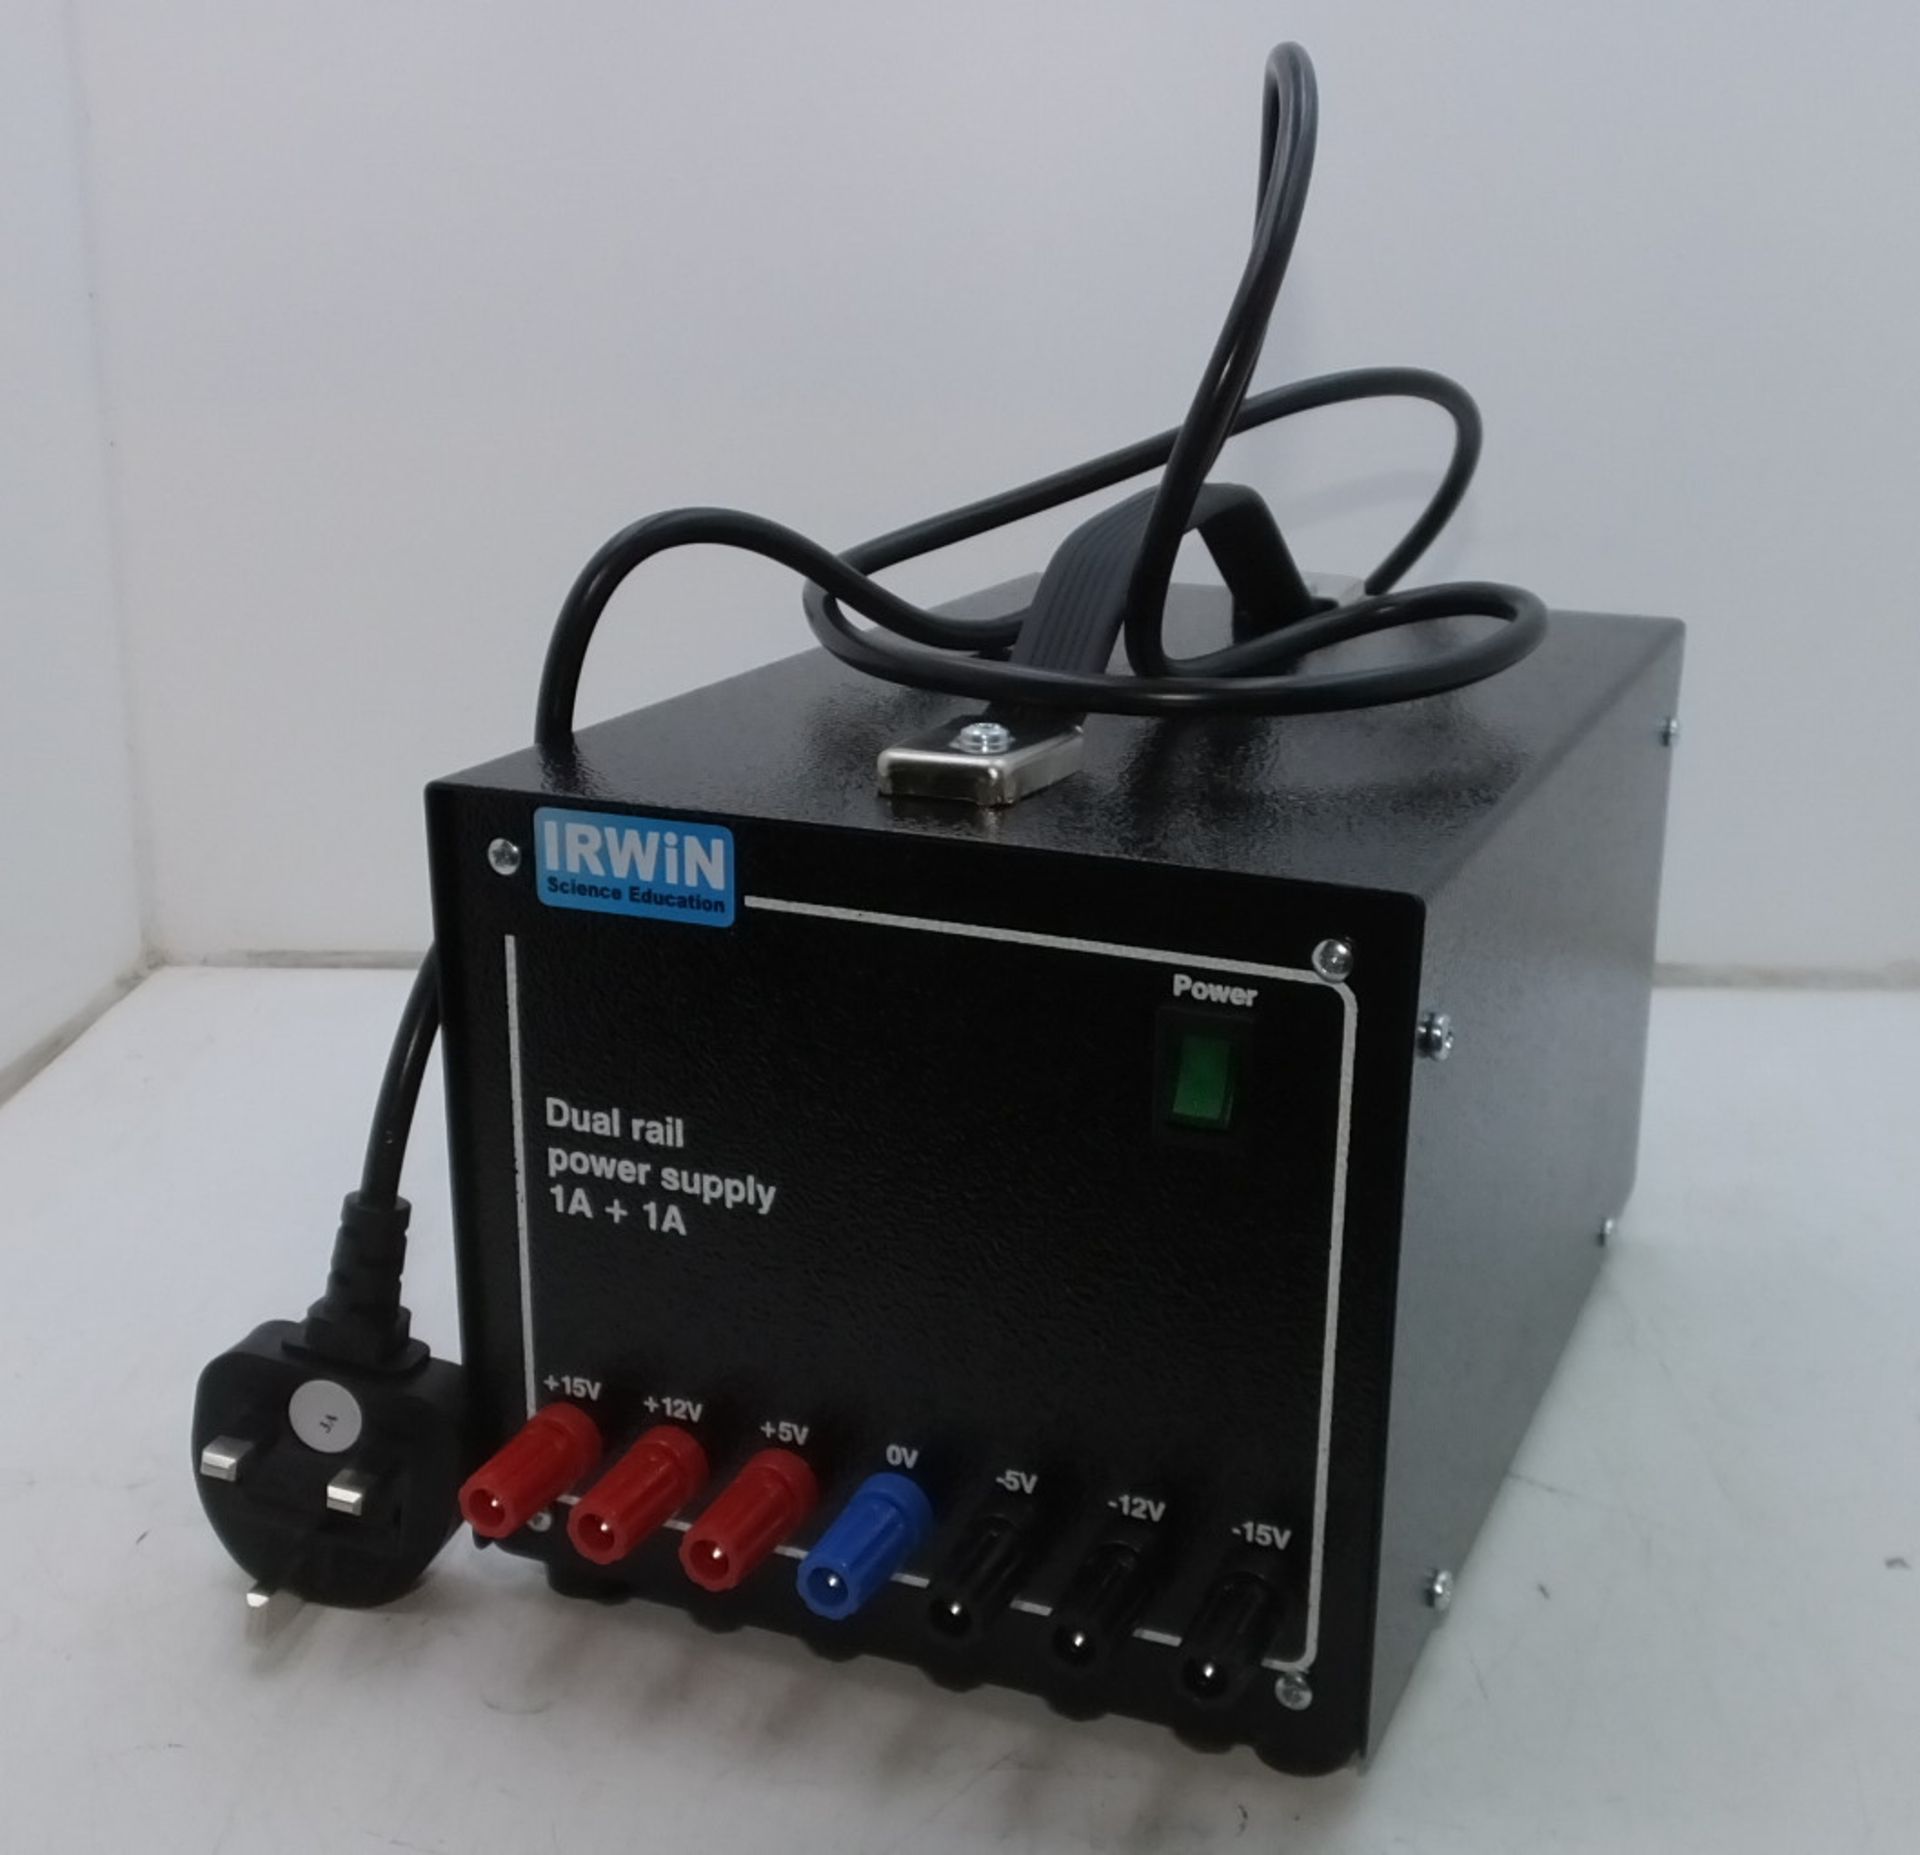 Irwin Dual Rail Power Supply 1A+1A - Image 2 of 2